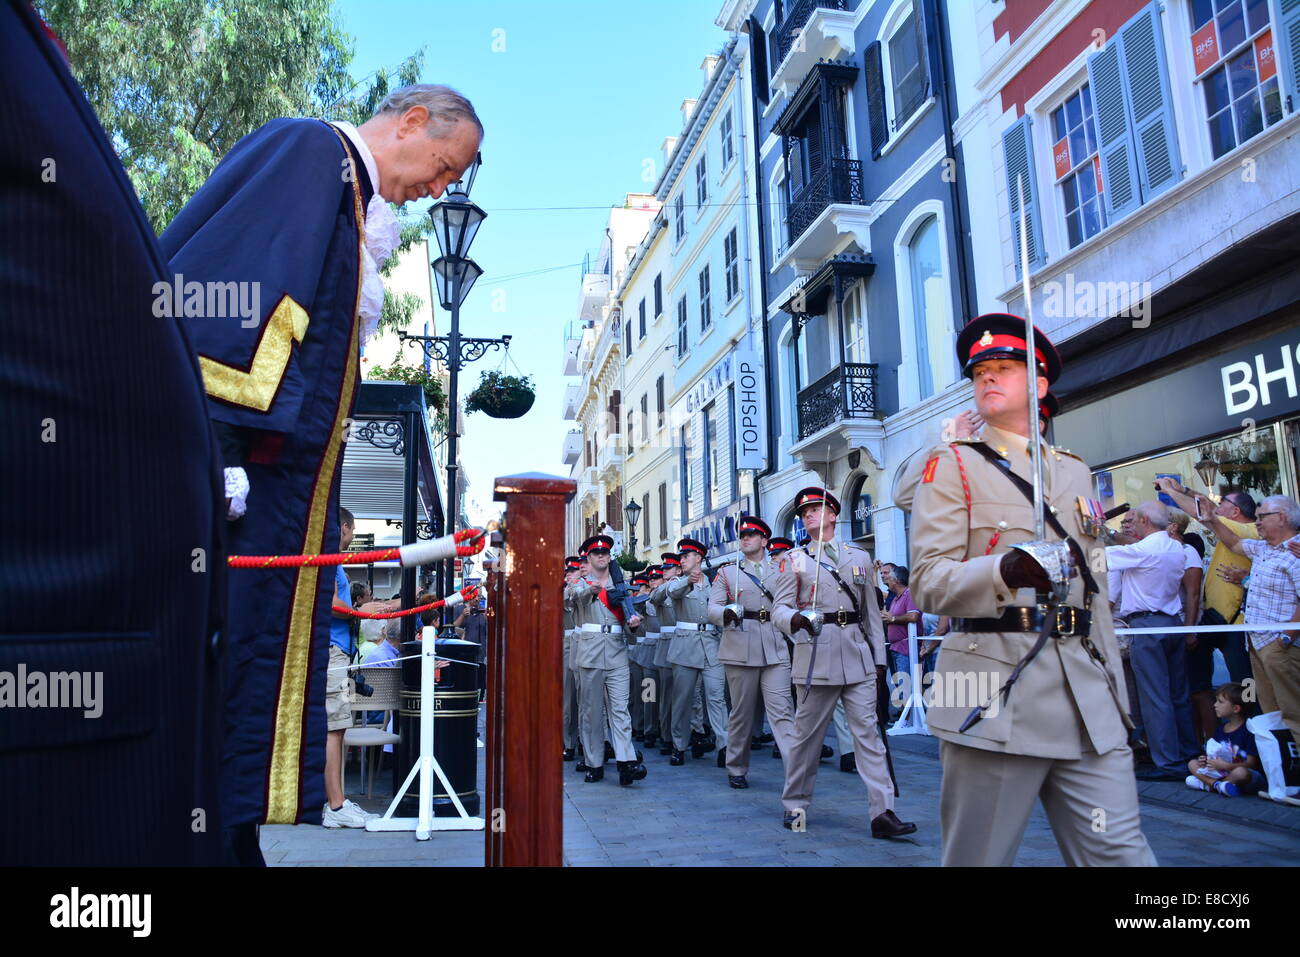 GIbraltar 5th October 2014 - The Royal Gibraltar Regiment marched through Main Street in Gibraltar, flying its full colours on Saturday 4th October. The Regiment is celebrating its 75th Anniversary. As holders of the Freedom of the City award the Regiment took the opportunity to march through Gibraltar's City Centre, saluting the Mayor and Governor. Credit:  Stephen Ignacio/Alamy Live News Stock Photo